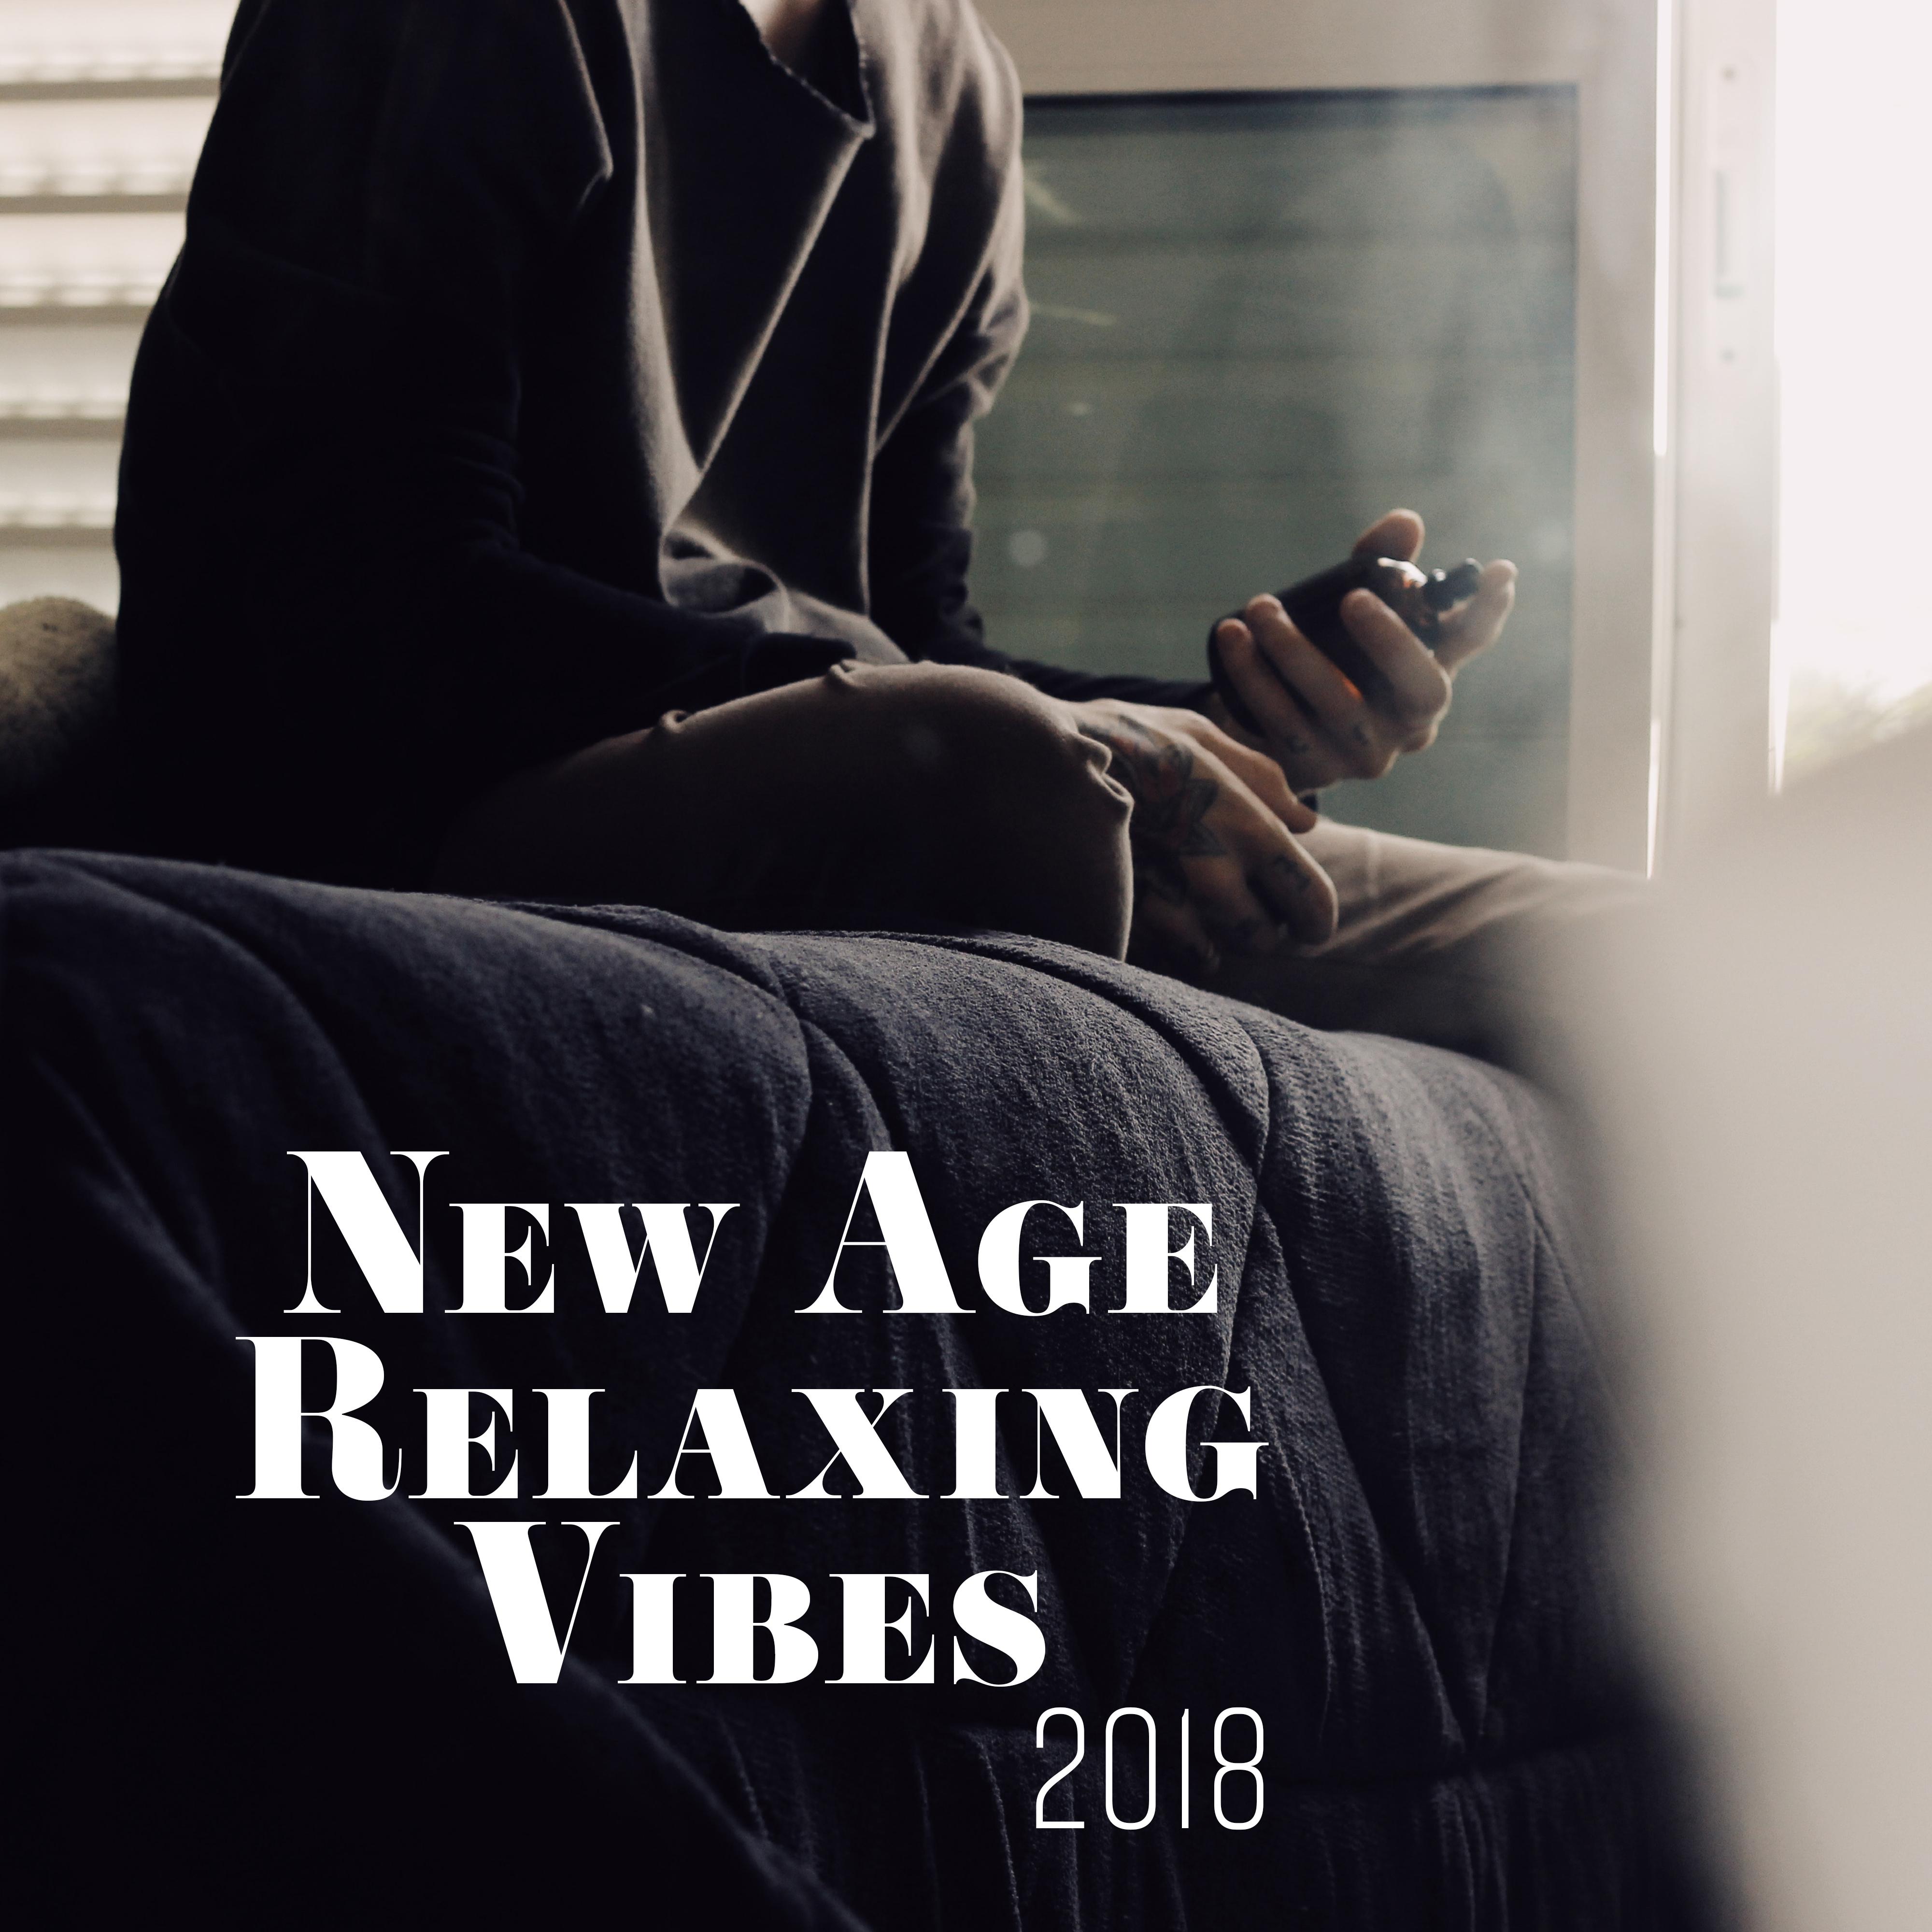 New Age Relaxing Vibes 2018